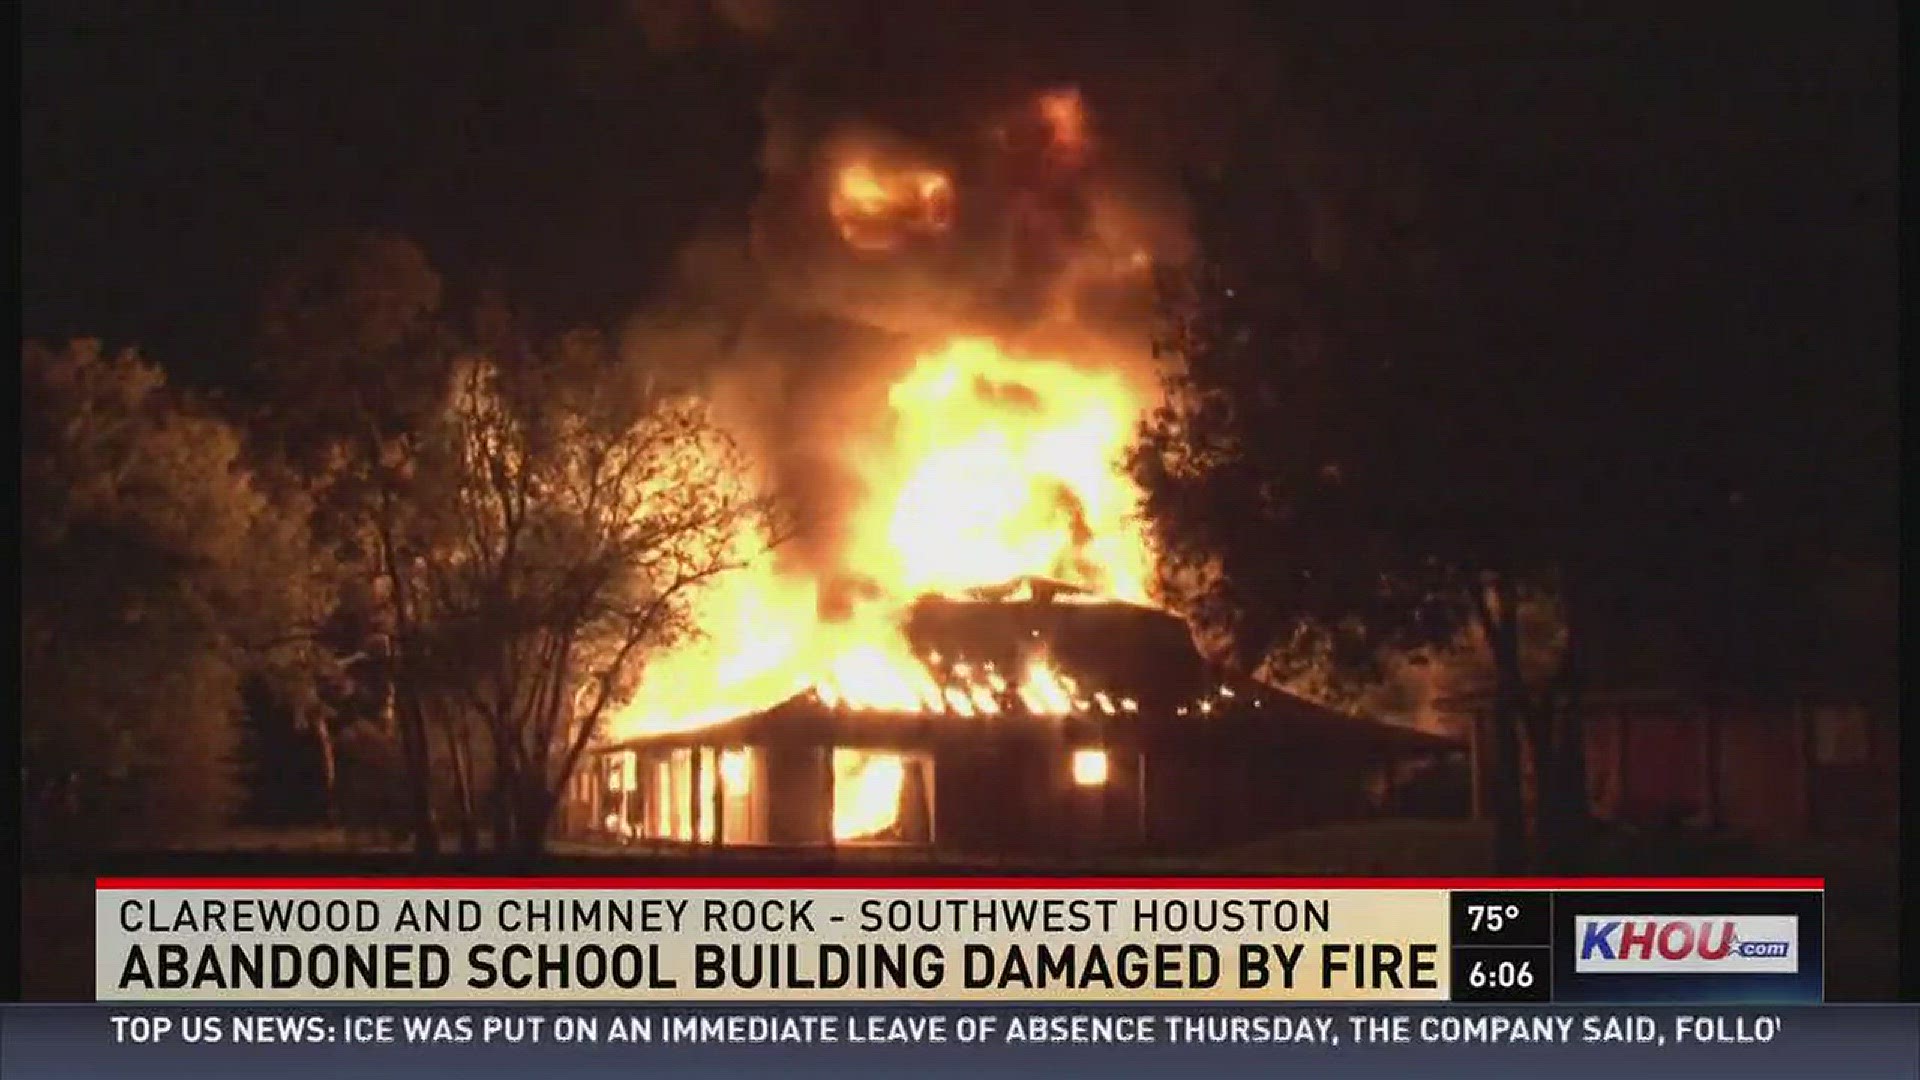 An abandoned school building in southwest Houston was damaged by fire overnight. It is being investigated as arson.